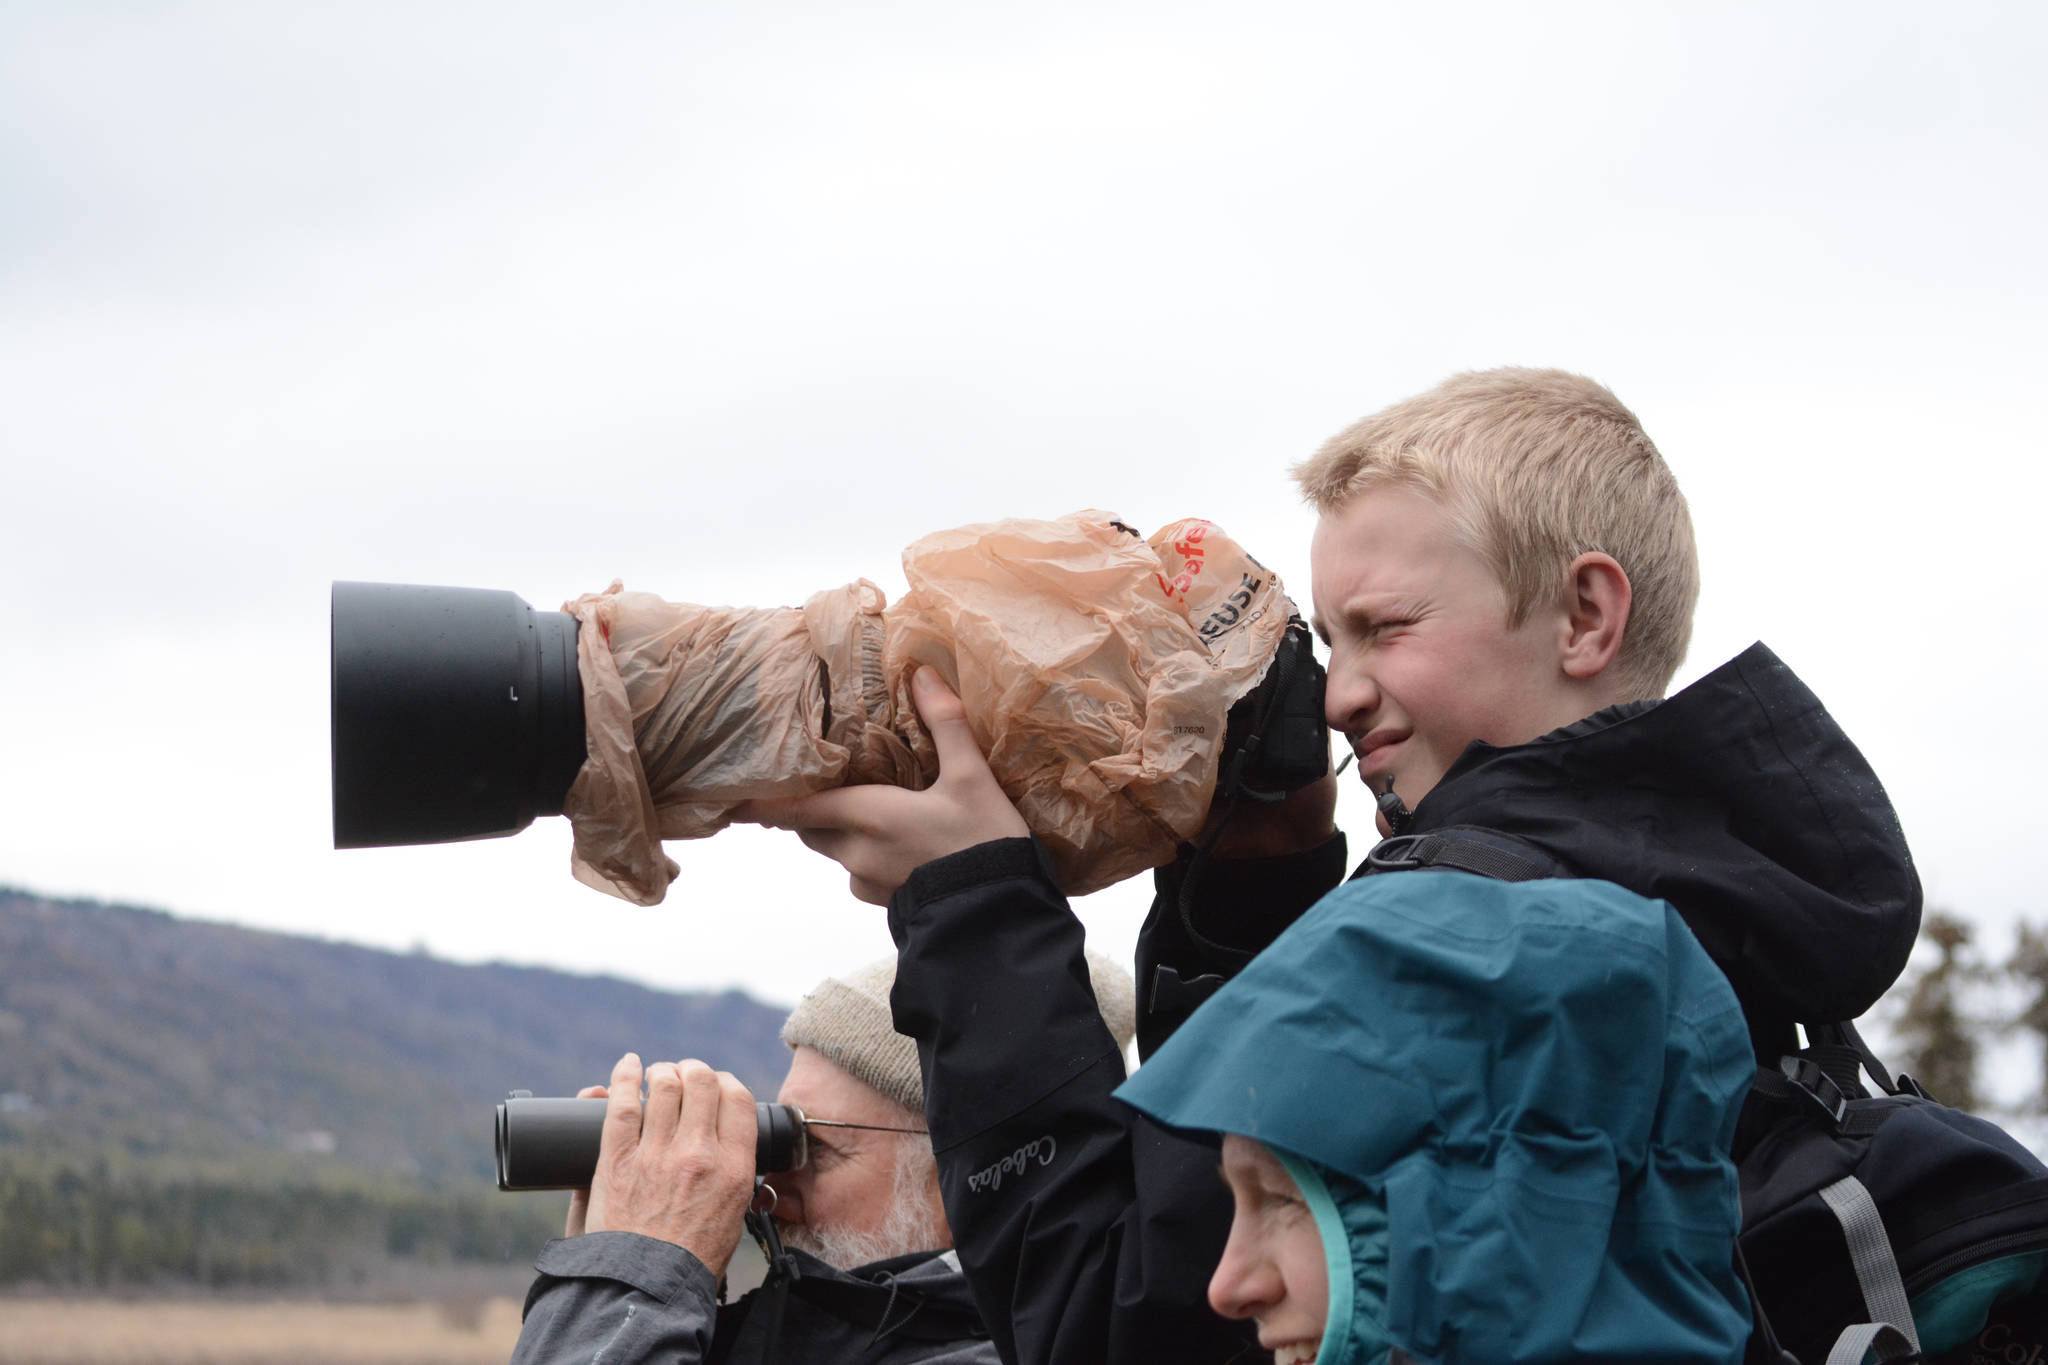 Josiah Verbrugge, 14, photographs birds with his mother, Heather Verbrugge, at Beluga Lake on May 10, 2019, in Homer, Alaska, during the Kachemak Bay Shorebird Festival. He rented the big lens just for the festival. (Photo by Michael Armstrong/Homer News)